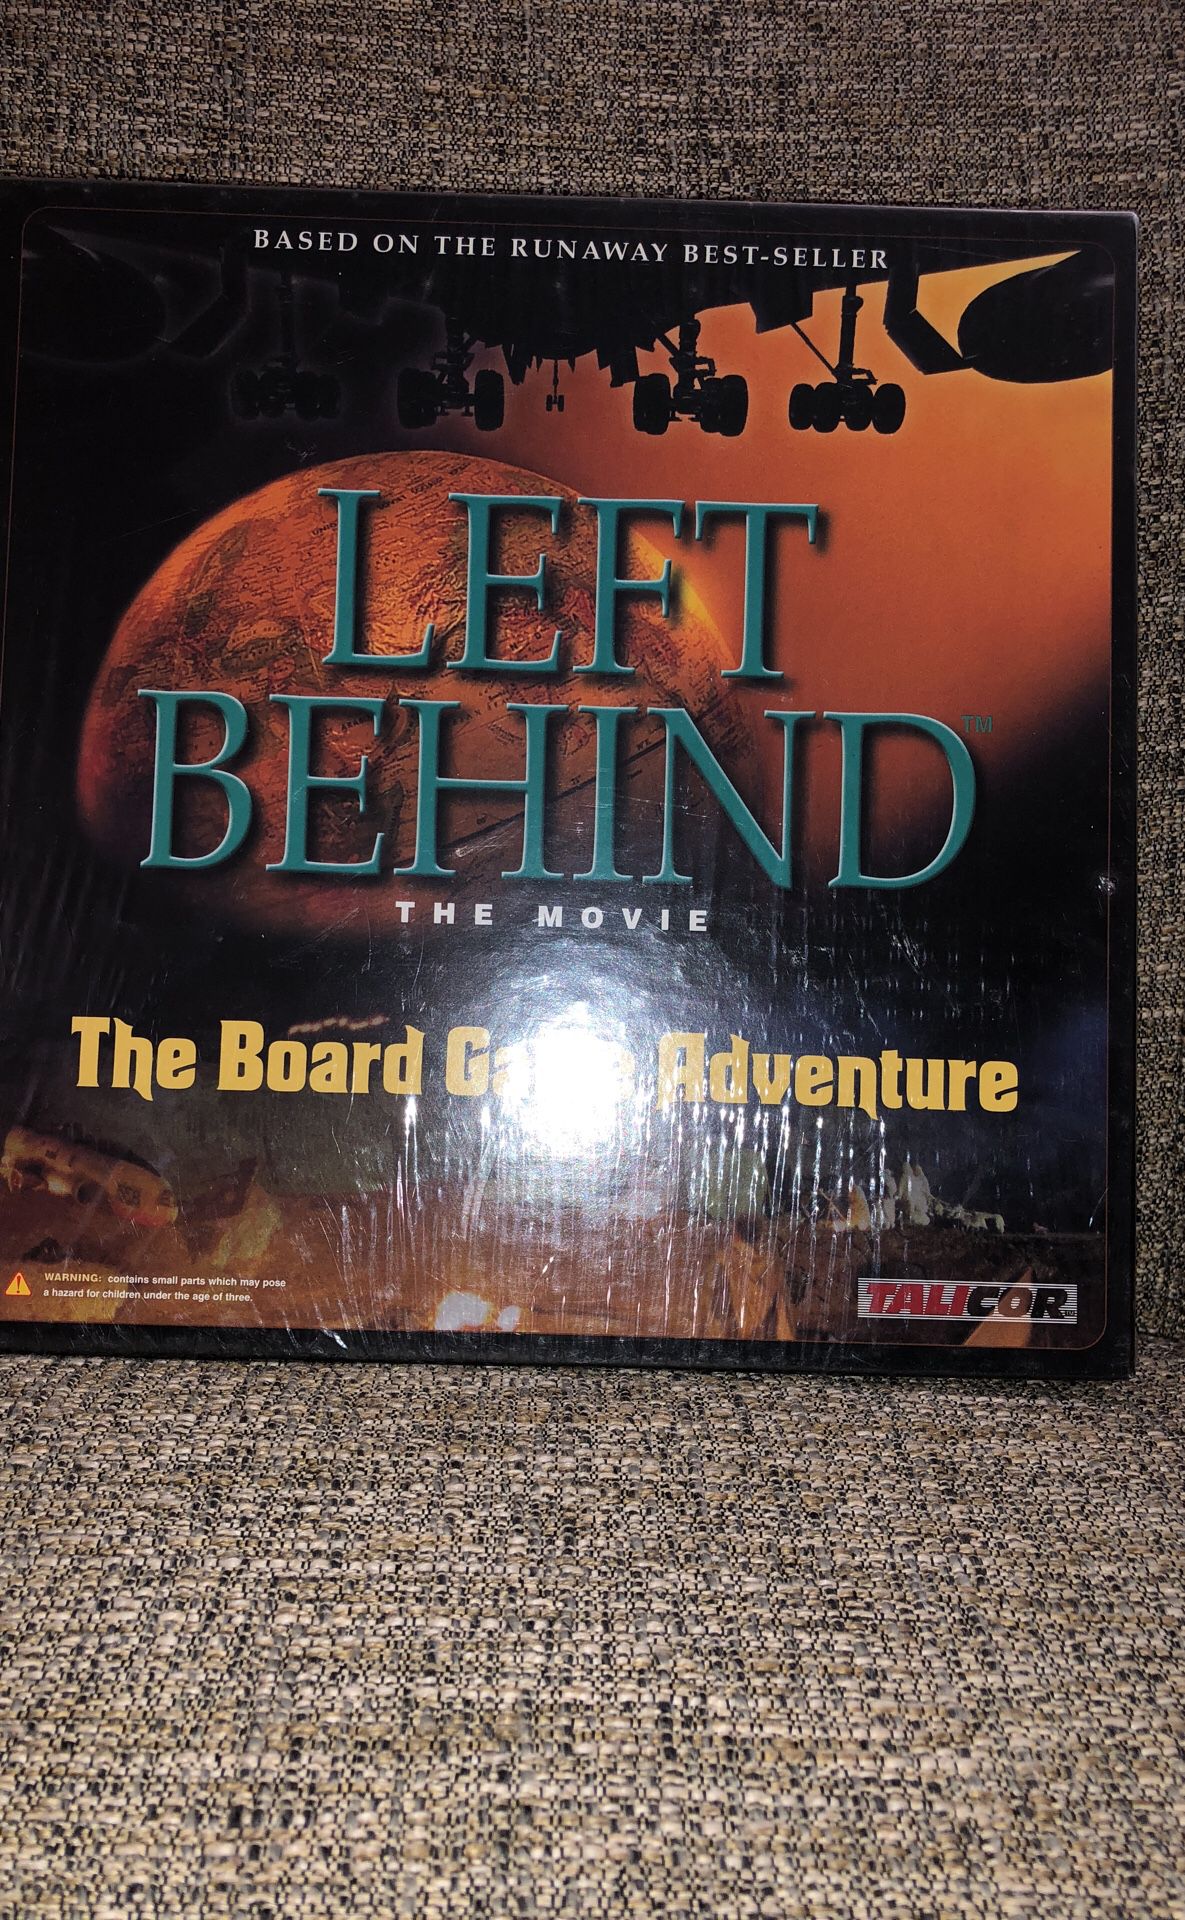 Left Behind ( The Movie) The Board Game Adventure. Please see all the pictures and read the description